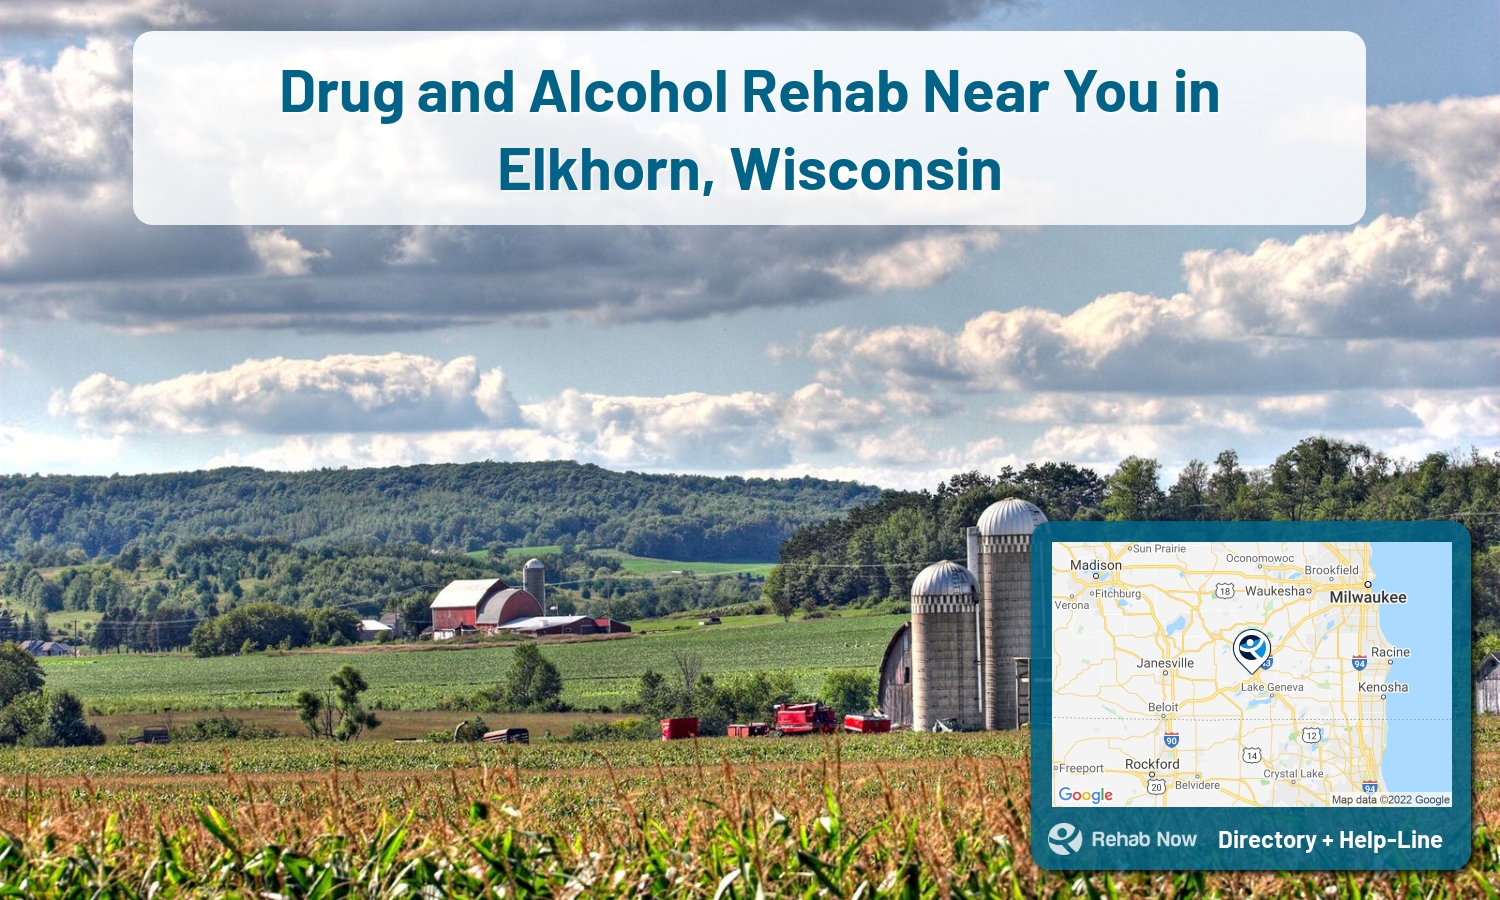 View options, availability, treatment methods, and more, for drug rehab and alcohol treatment in Elkhorn, Wisconsin